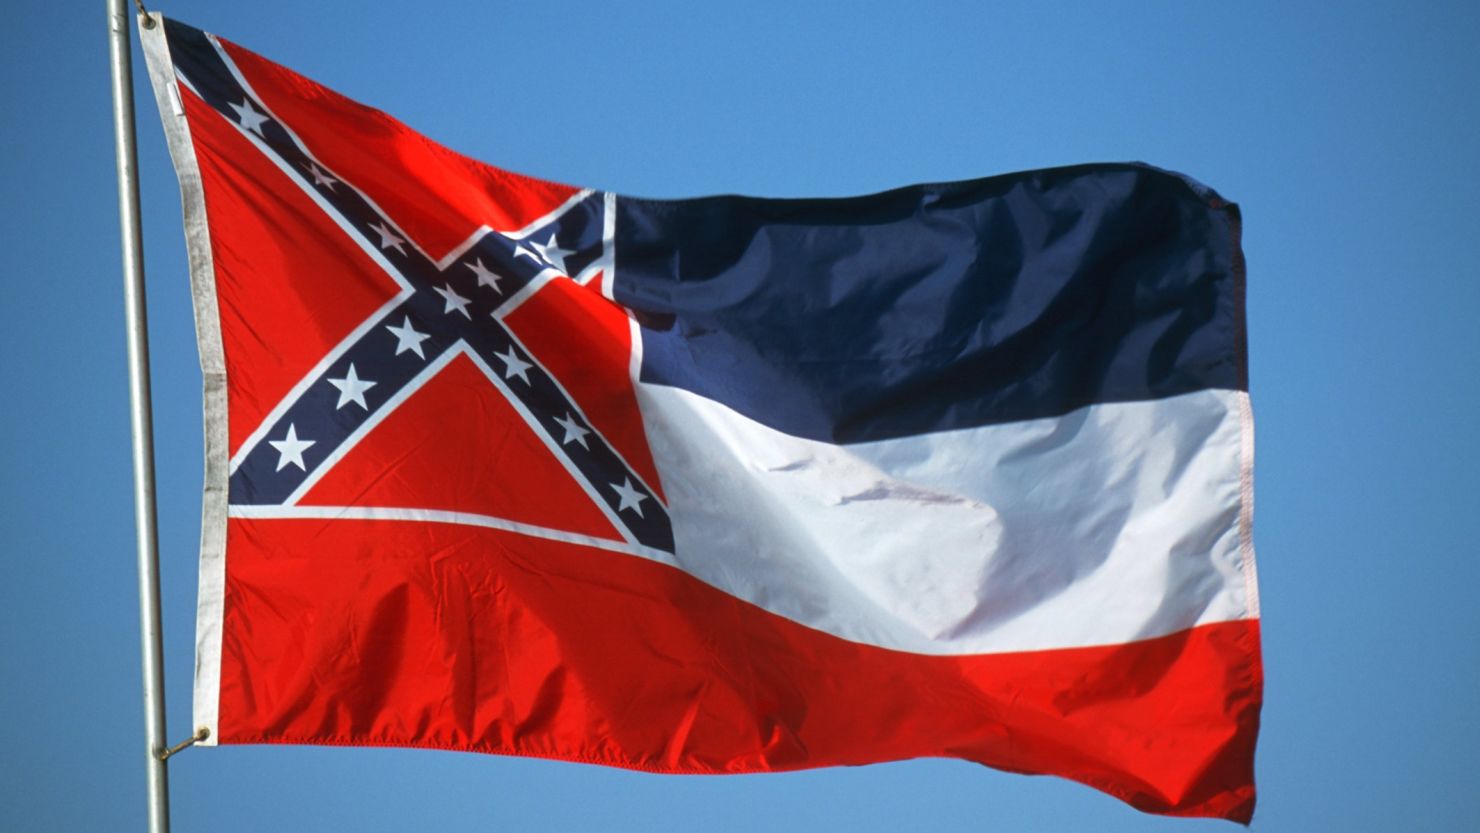  Mississippi is the last state with a flag that contains the Confederate battle emblem.